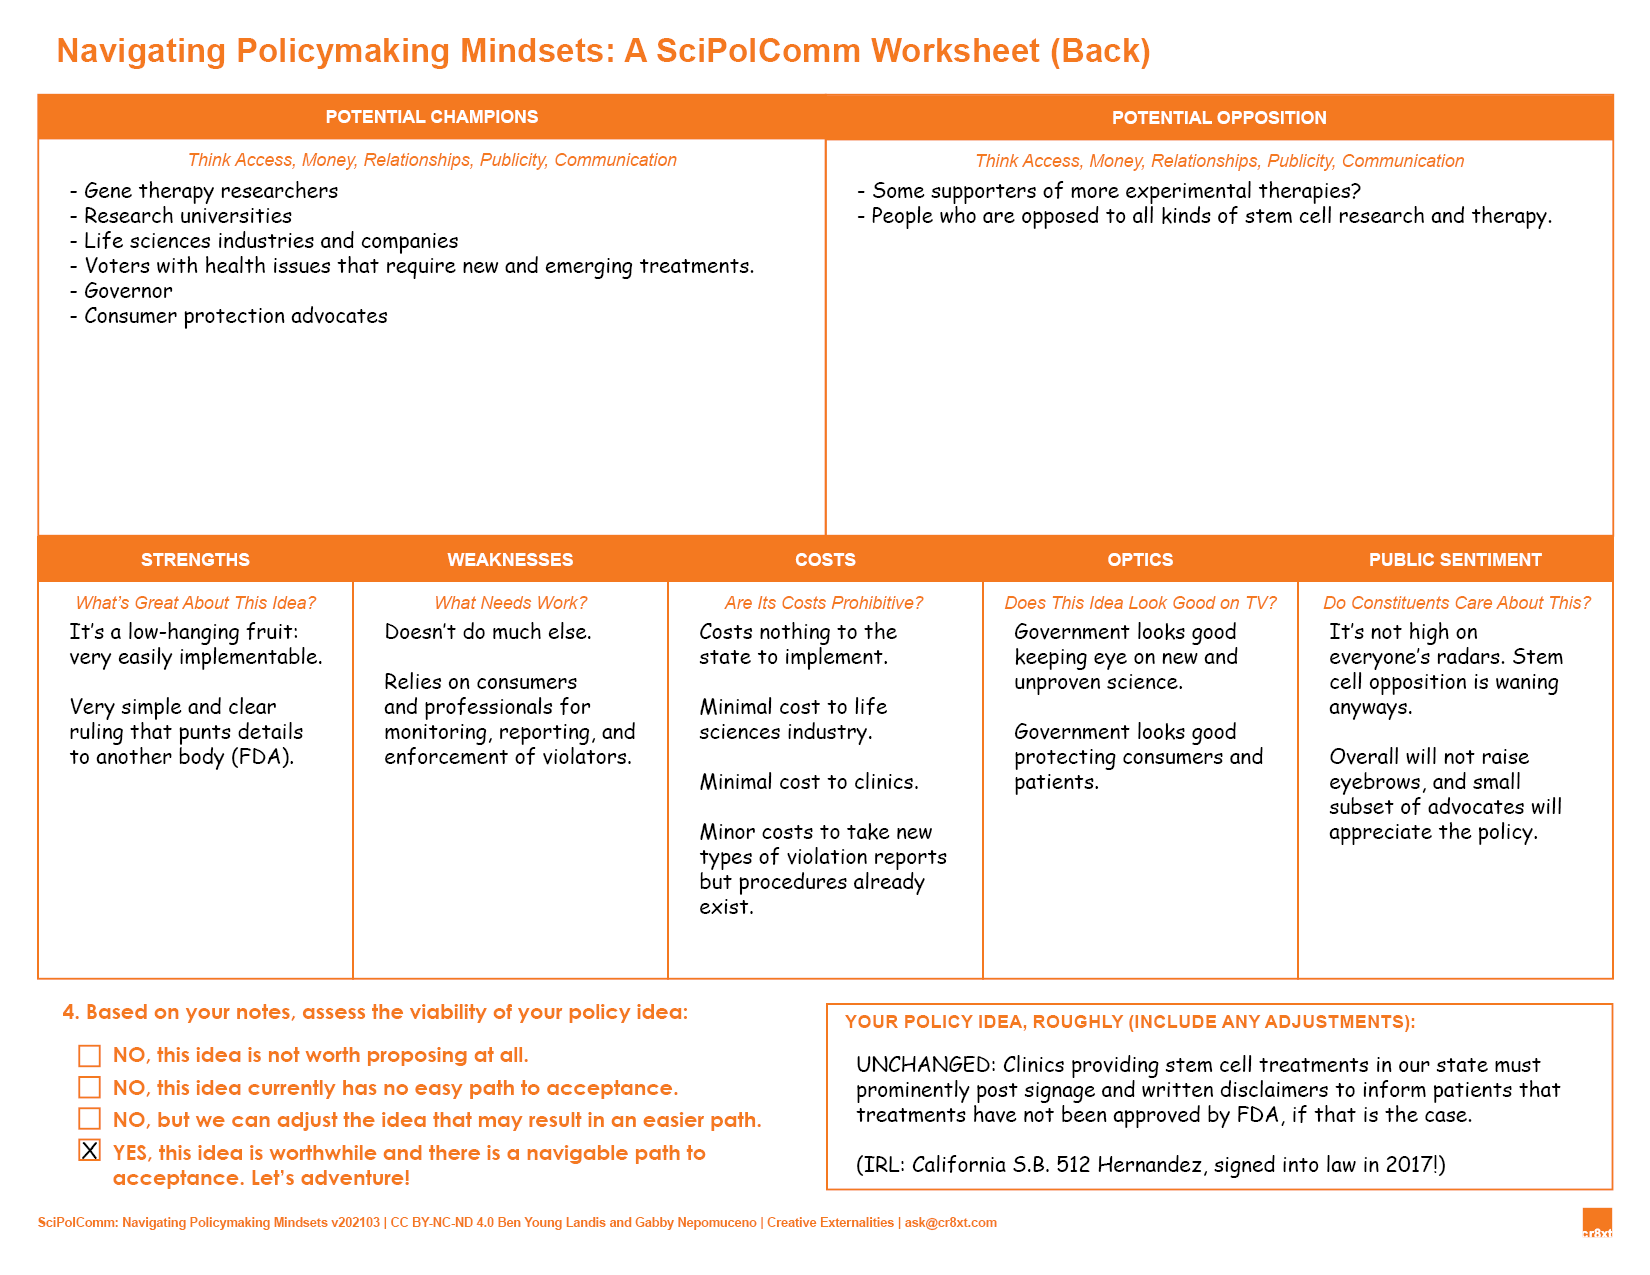 A screenshot of the back of the Navigating Policymaker Mindsets worksheet, created by Ben Young Landis and Gabby Nepomuceno. Set up as champions versus opposition boxes, and then a row of strengths, weaknesses, costs, optics, public sentiment boxes, followed by a final prompt of Assess the Viability of Your Policy Idea. The workshsheet is in orange ink on white paper, and this specific image depicts the Stem Cell Therapy example PDF.